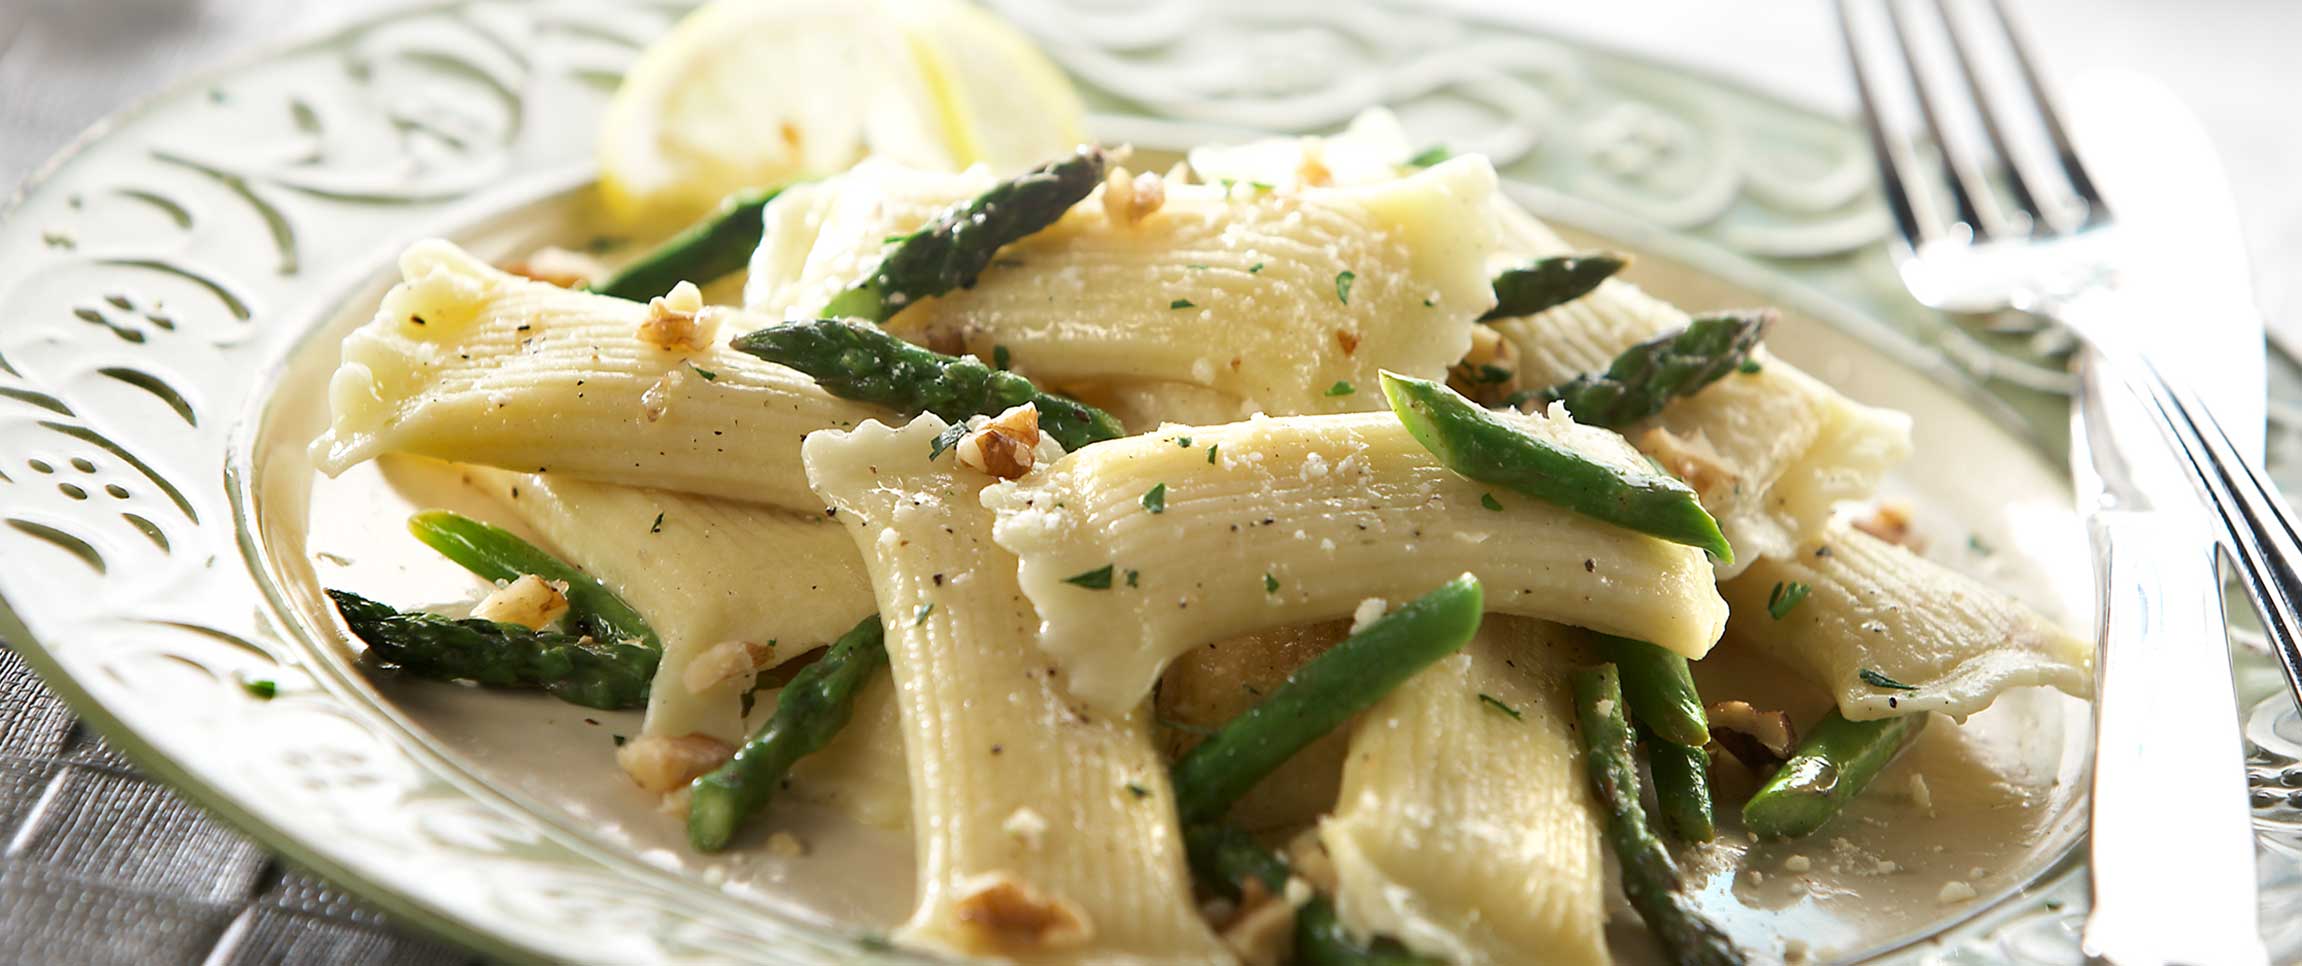 Cheese Rigatoni with Asparagus